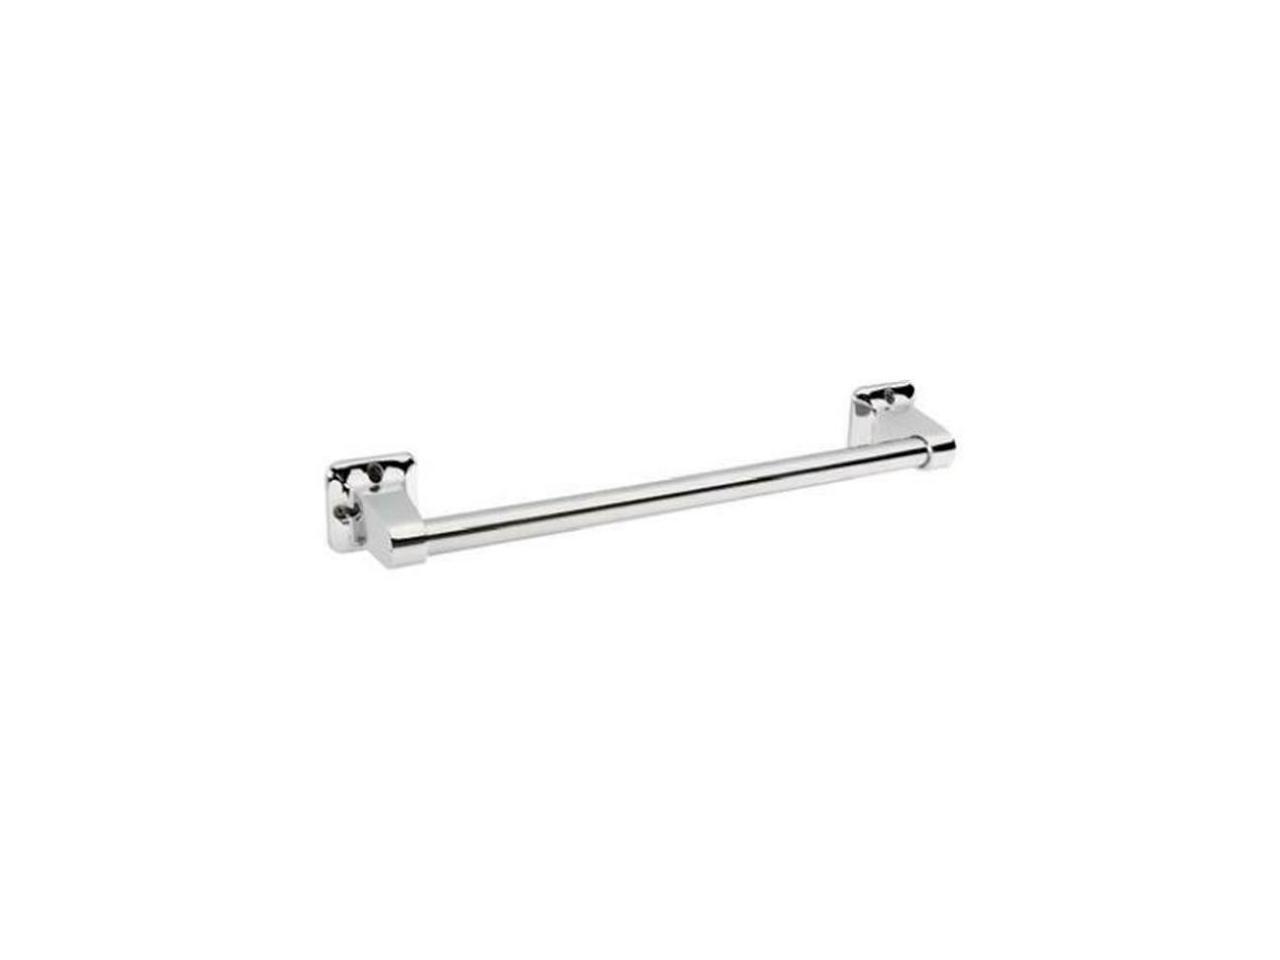 Delta DF516W Exposed Screw Residential Assist Bar White 16" x 7/8" 